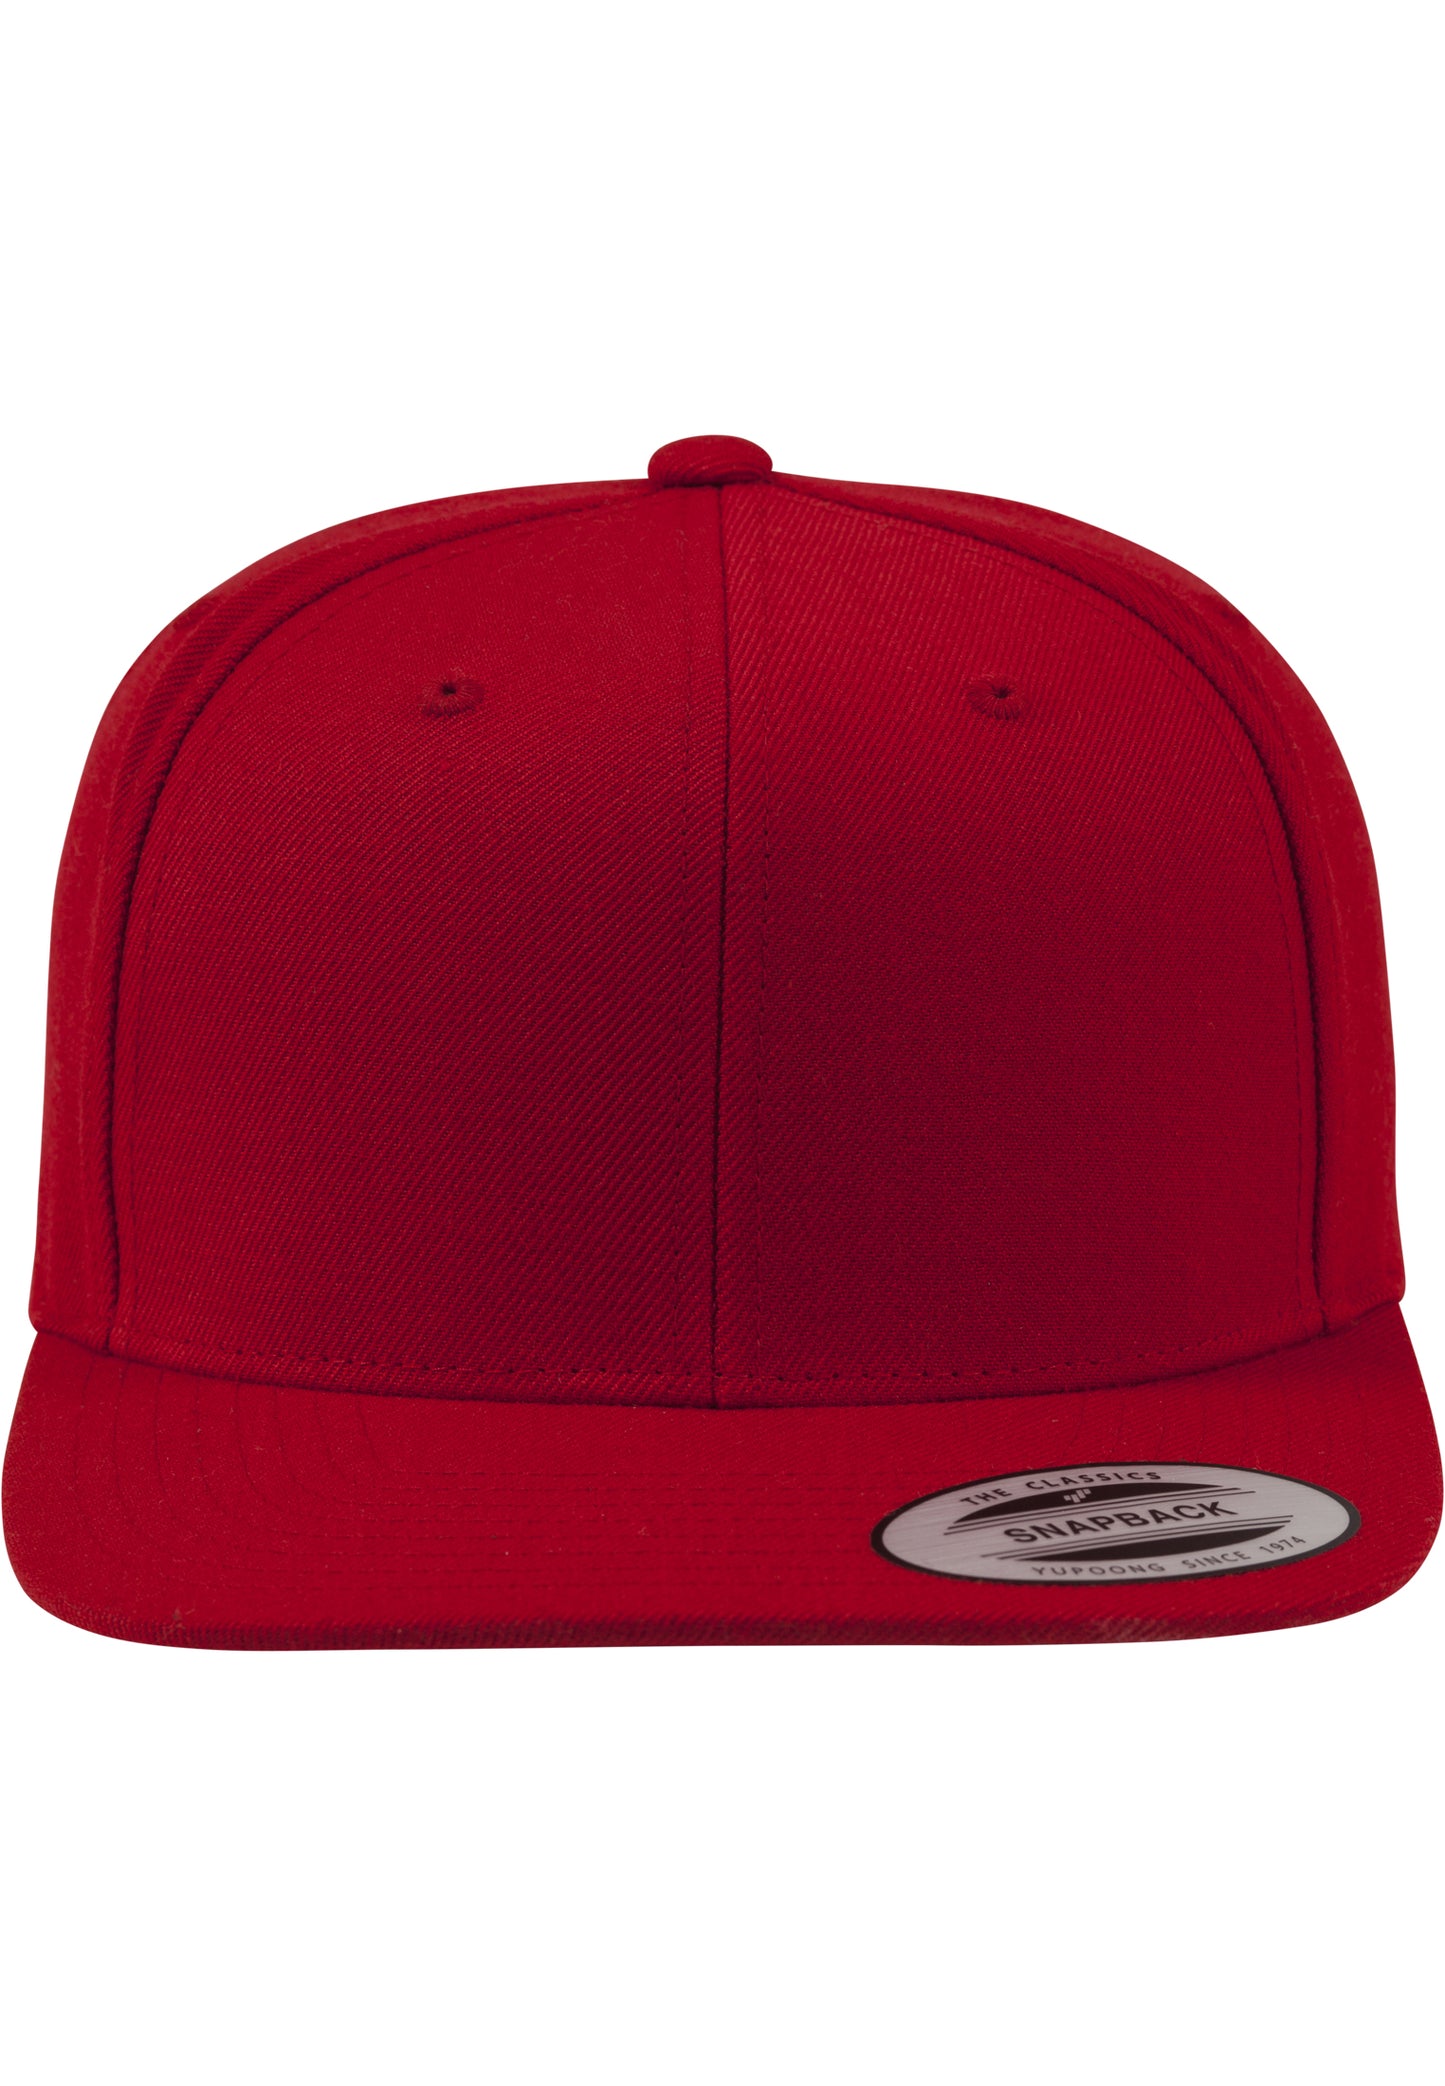 Classic Snapback - Red/Red - Headz Up 